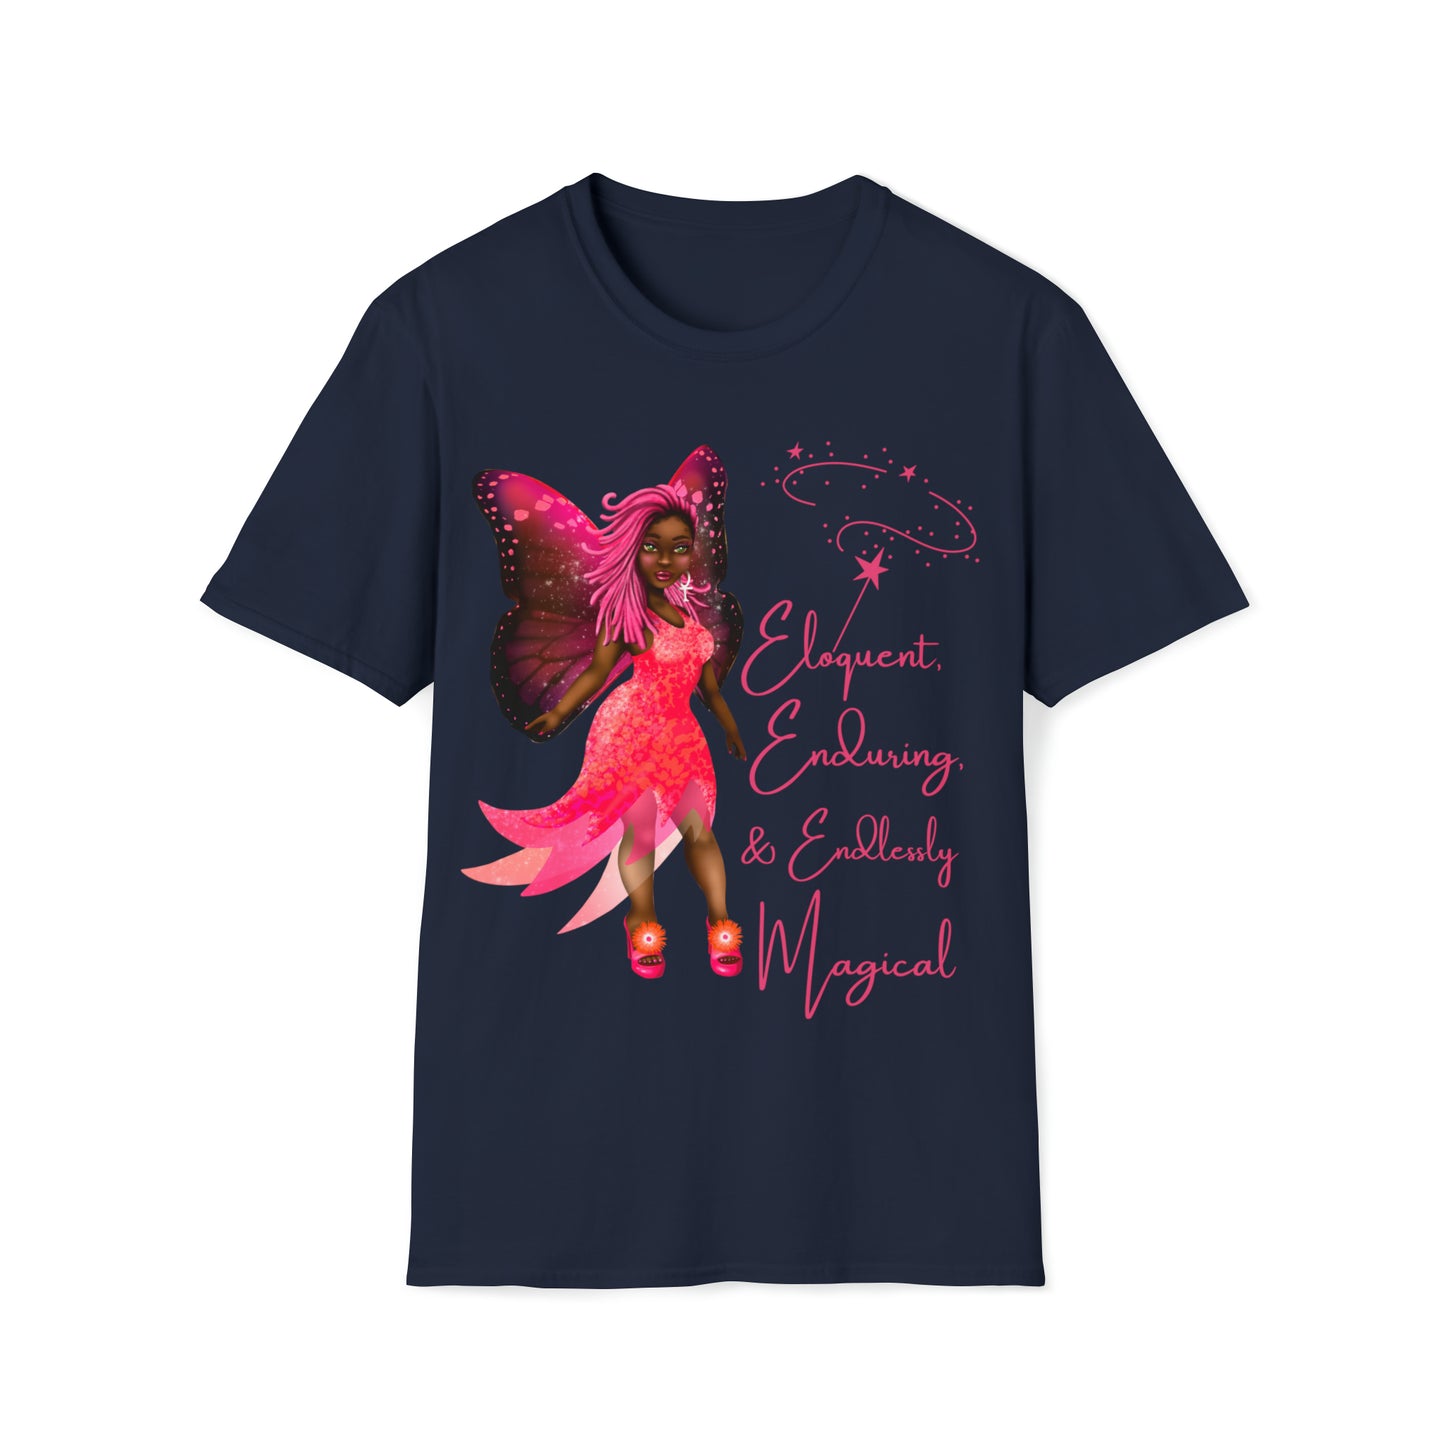 ELOQUENT, ENDURING, & ENDLESSLY MAGICAL | Adult Unisex Softstyle T-Shirt | Blerd Girl Fashion